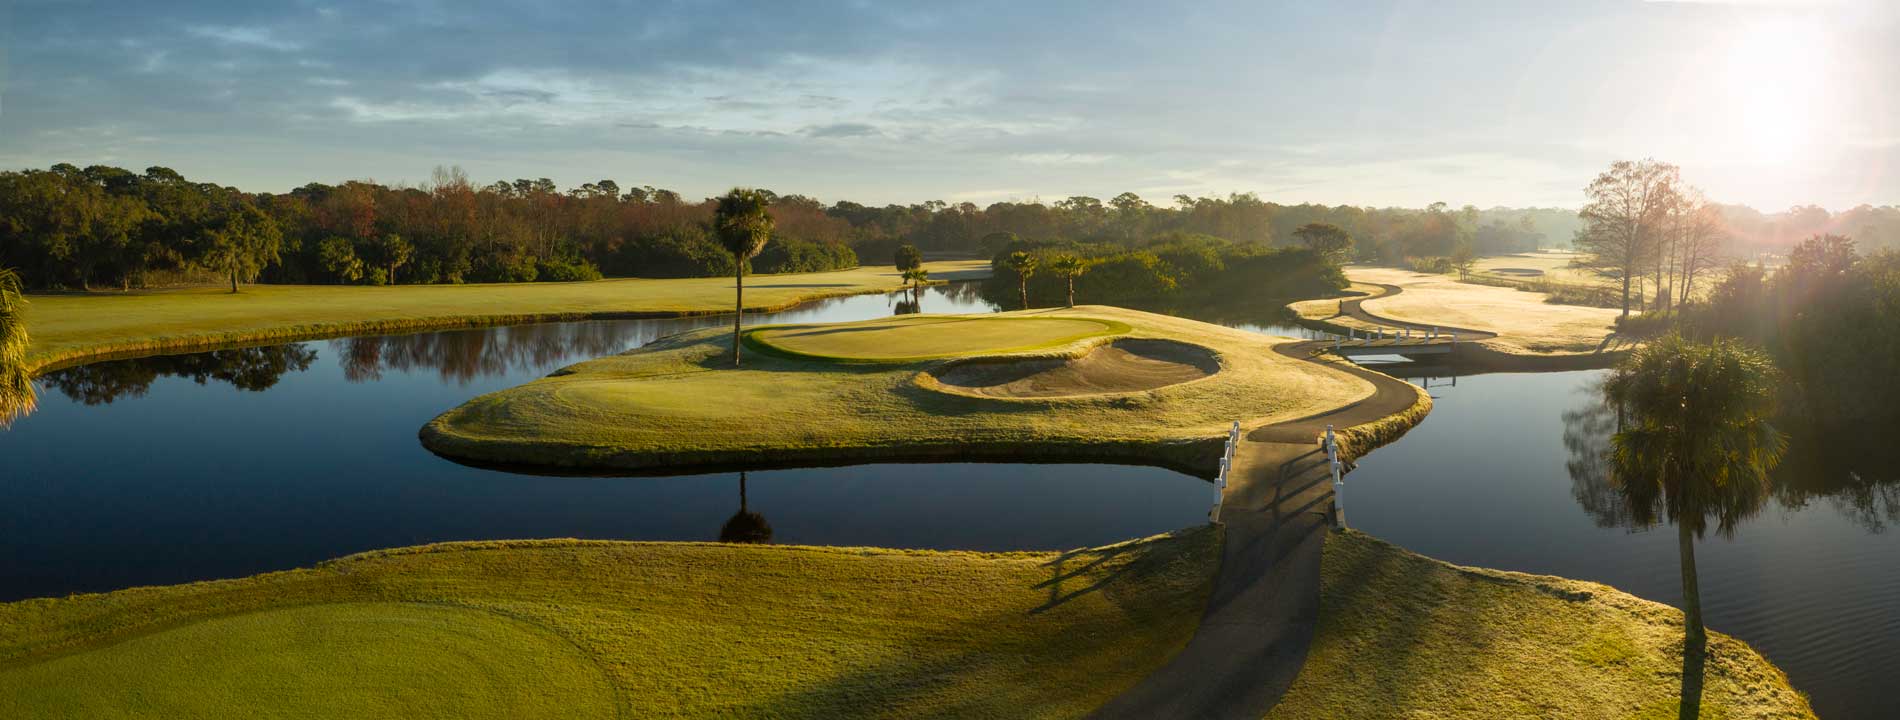 Just minutes from Tampa Bay International and right off bustling U.S. 41., Innisbrook's Copperhead Course hosts the PGA Tour’s Valspar Championship and is a perennial favorite of Tour players.